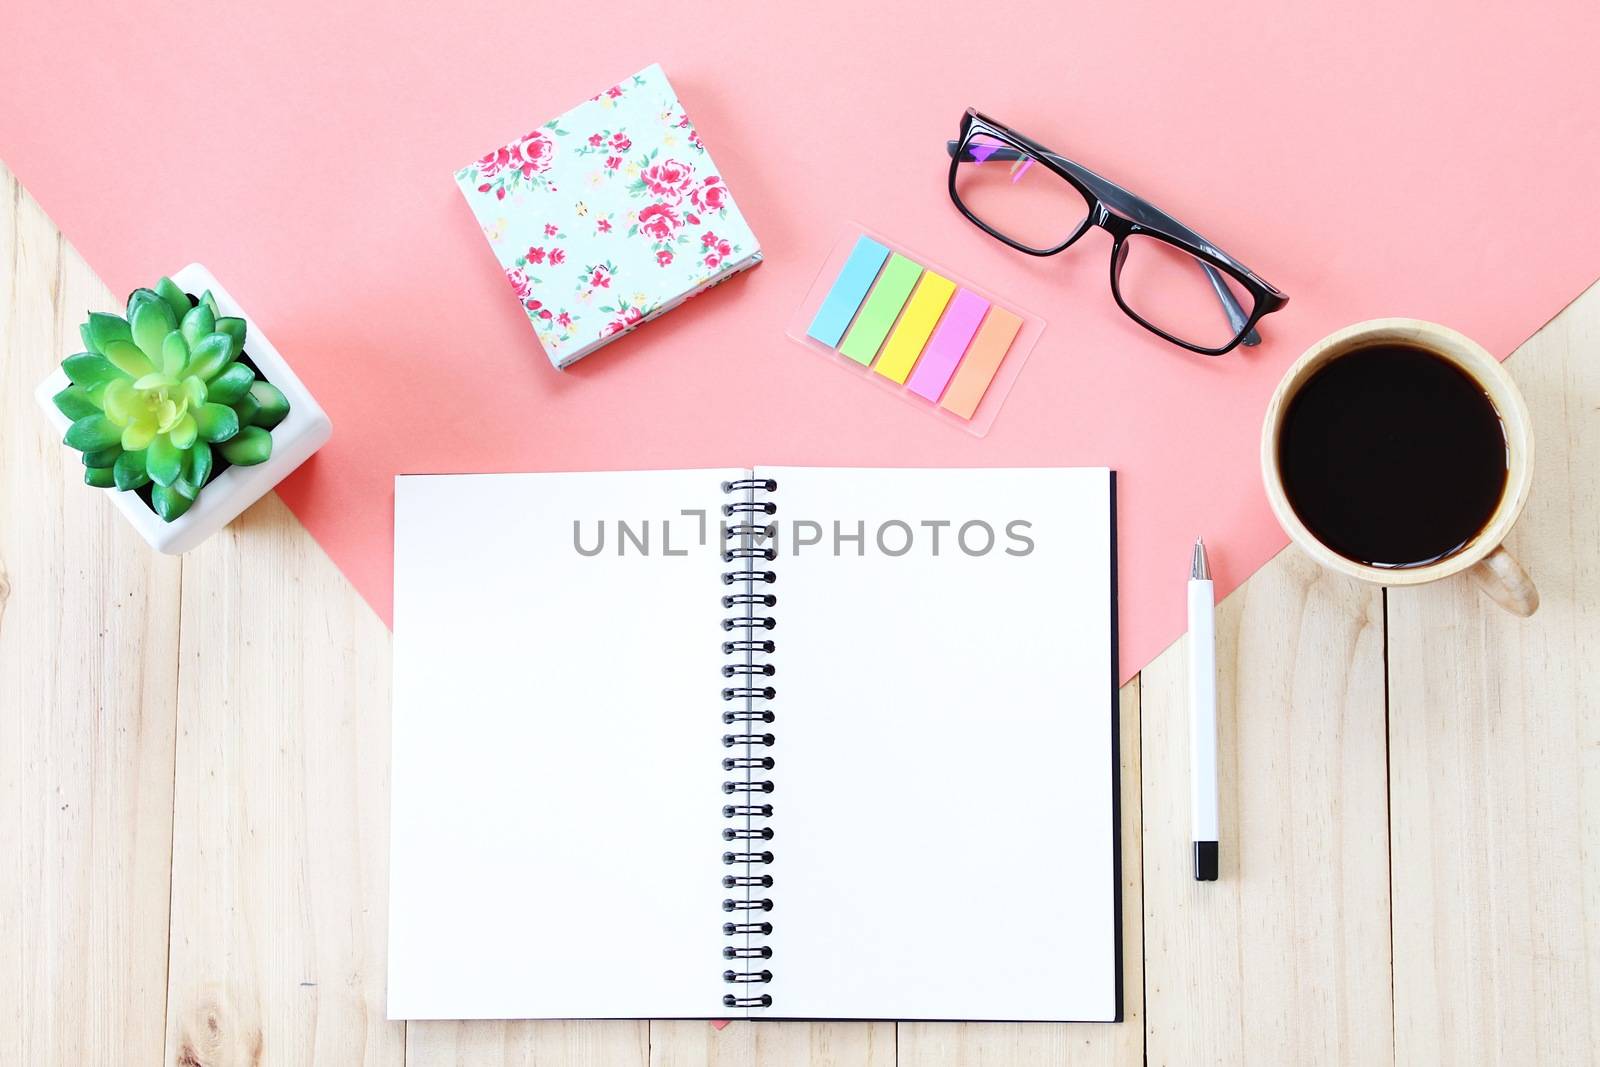 Still life, business, office supplies or education concept : Top view image of open notebook with blank pages, accessories and coffee cup on wooden background, ready for adding or mock up